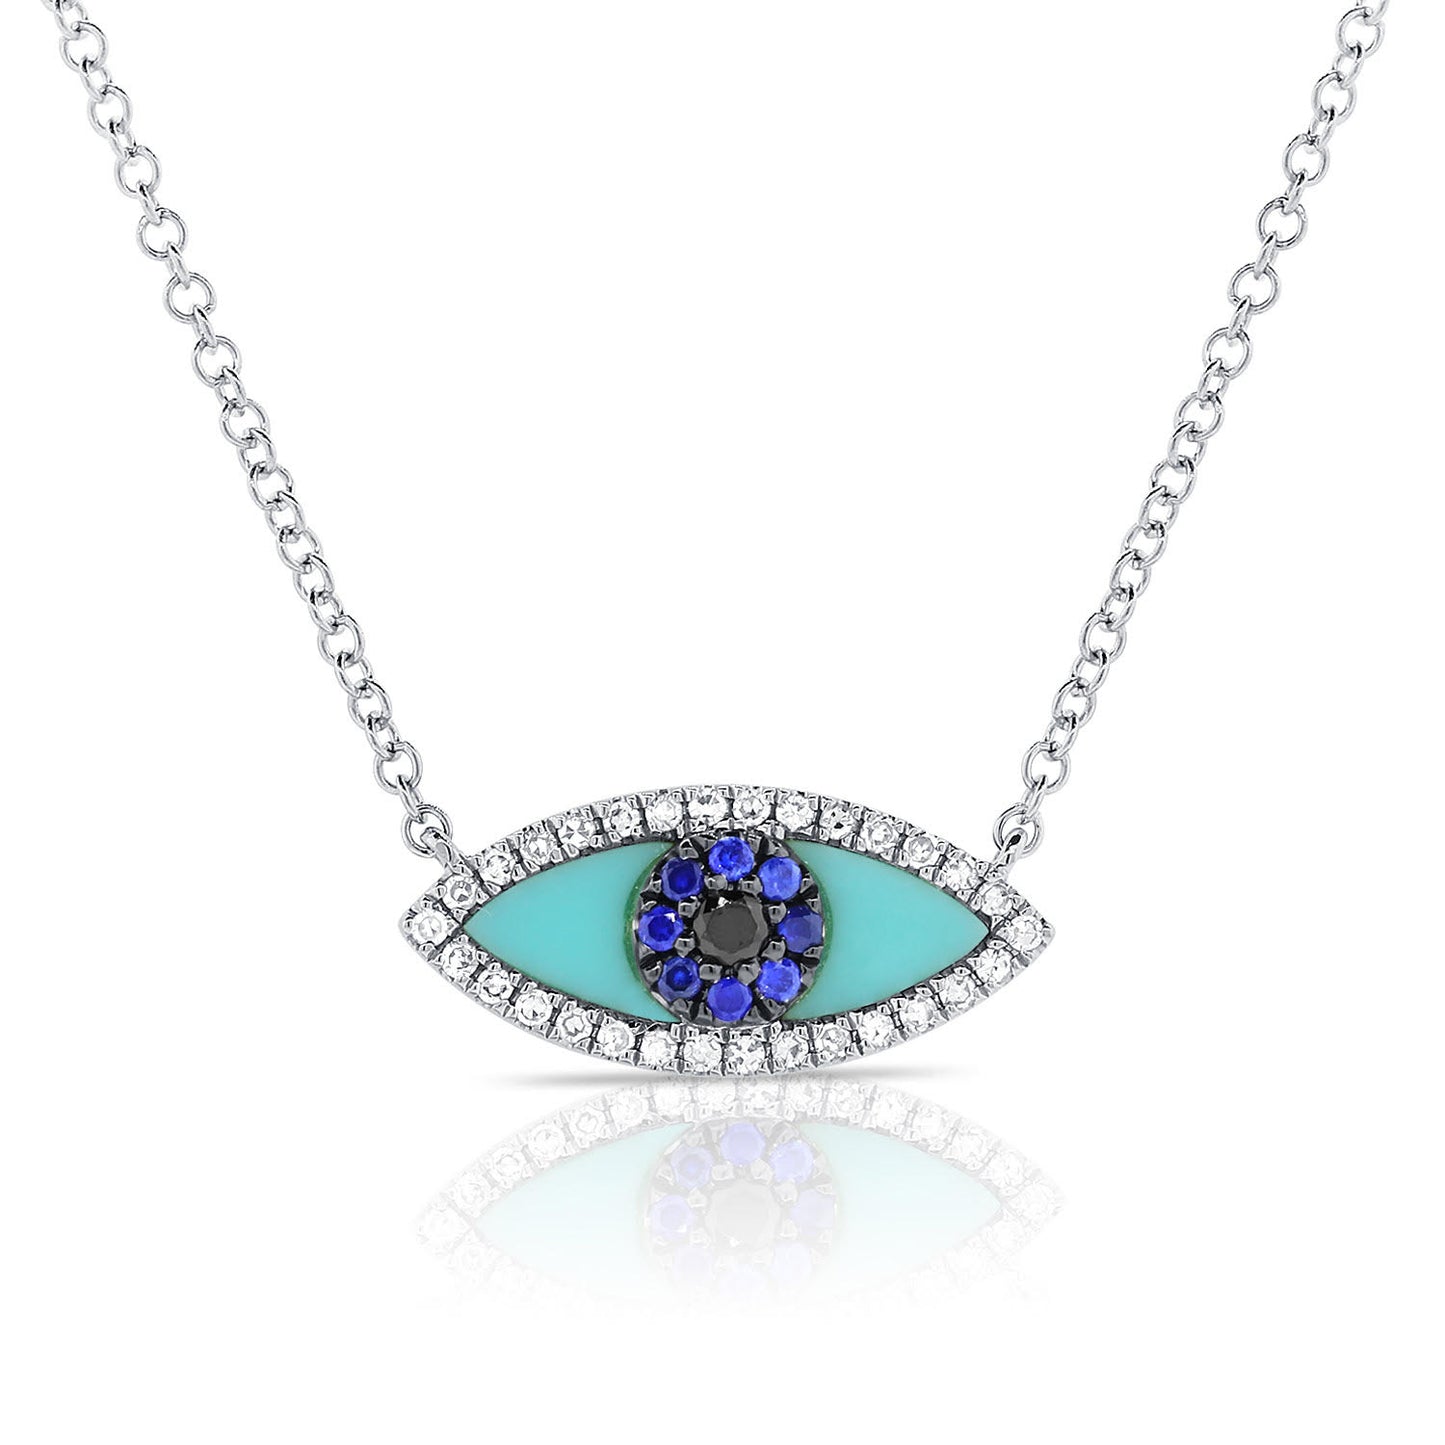 Turquoise, Sapphire & Diamond Eye on Chain Necklace